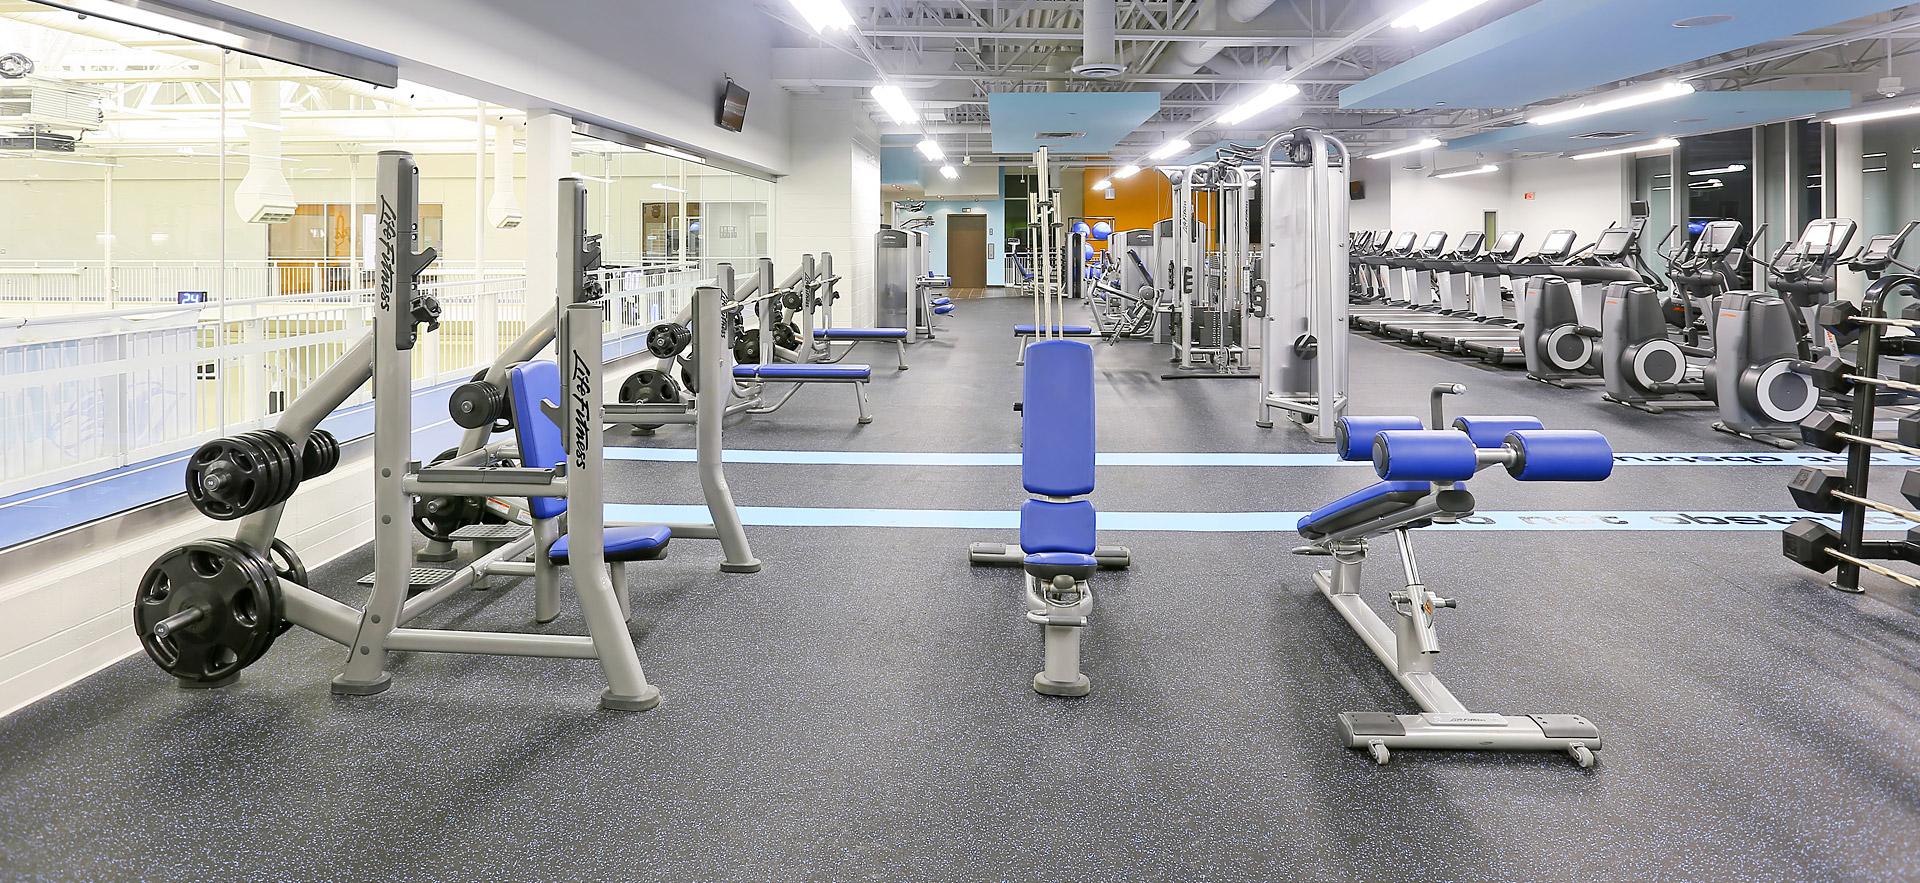 Interior view of the ϲͼȫ Fitness area.